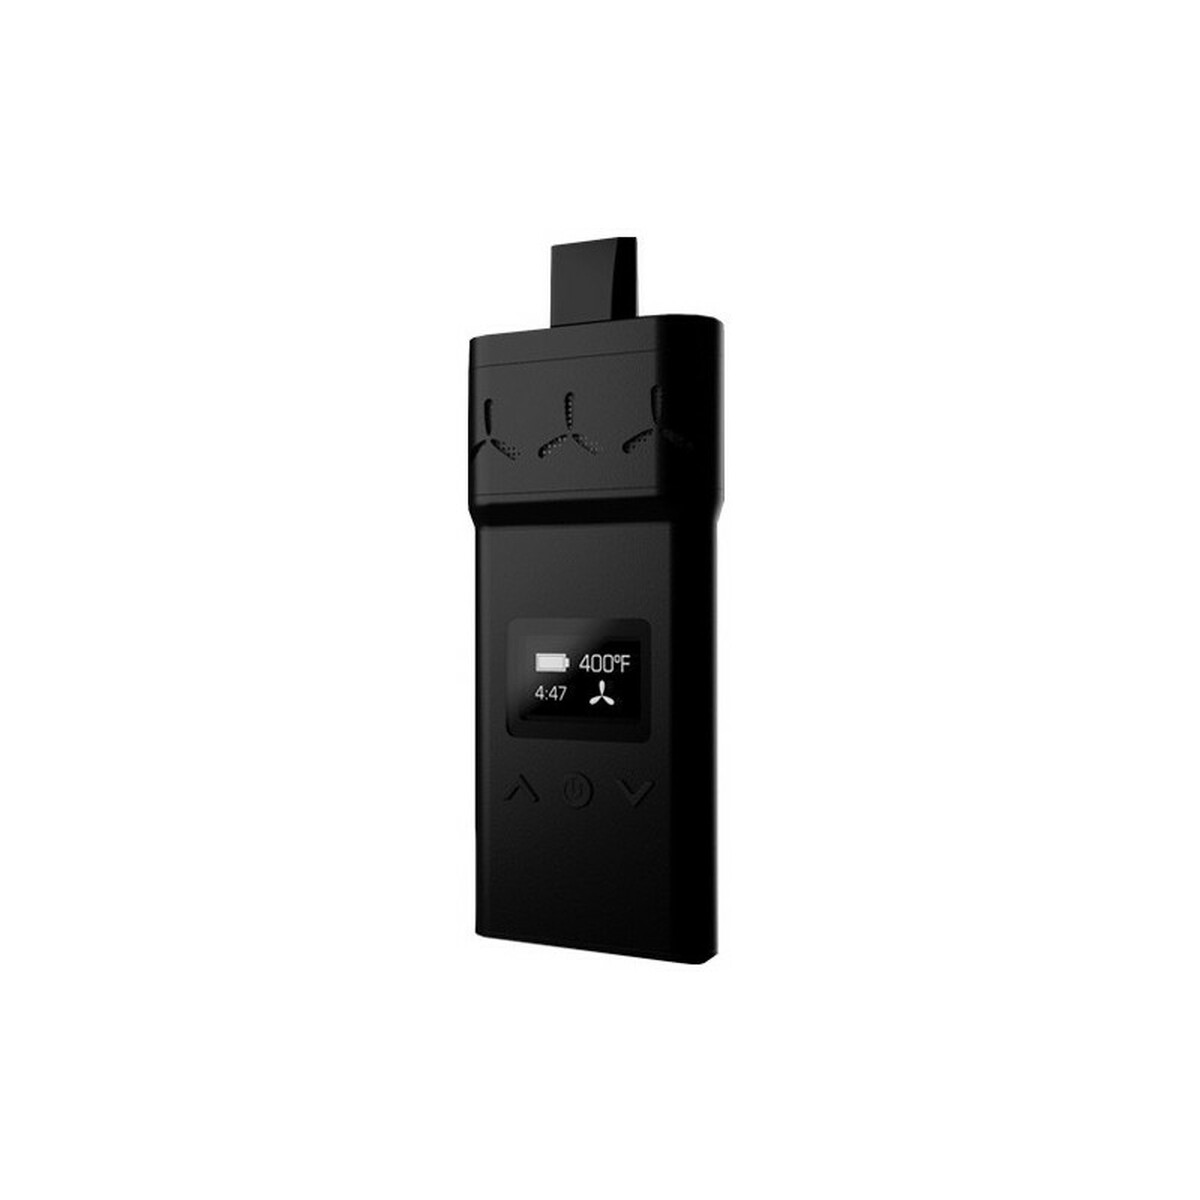 X-SERIES VAPORIZER BY AIRVAPE